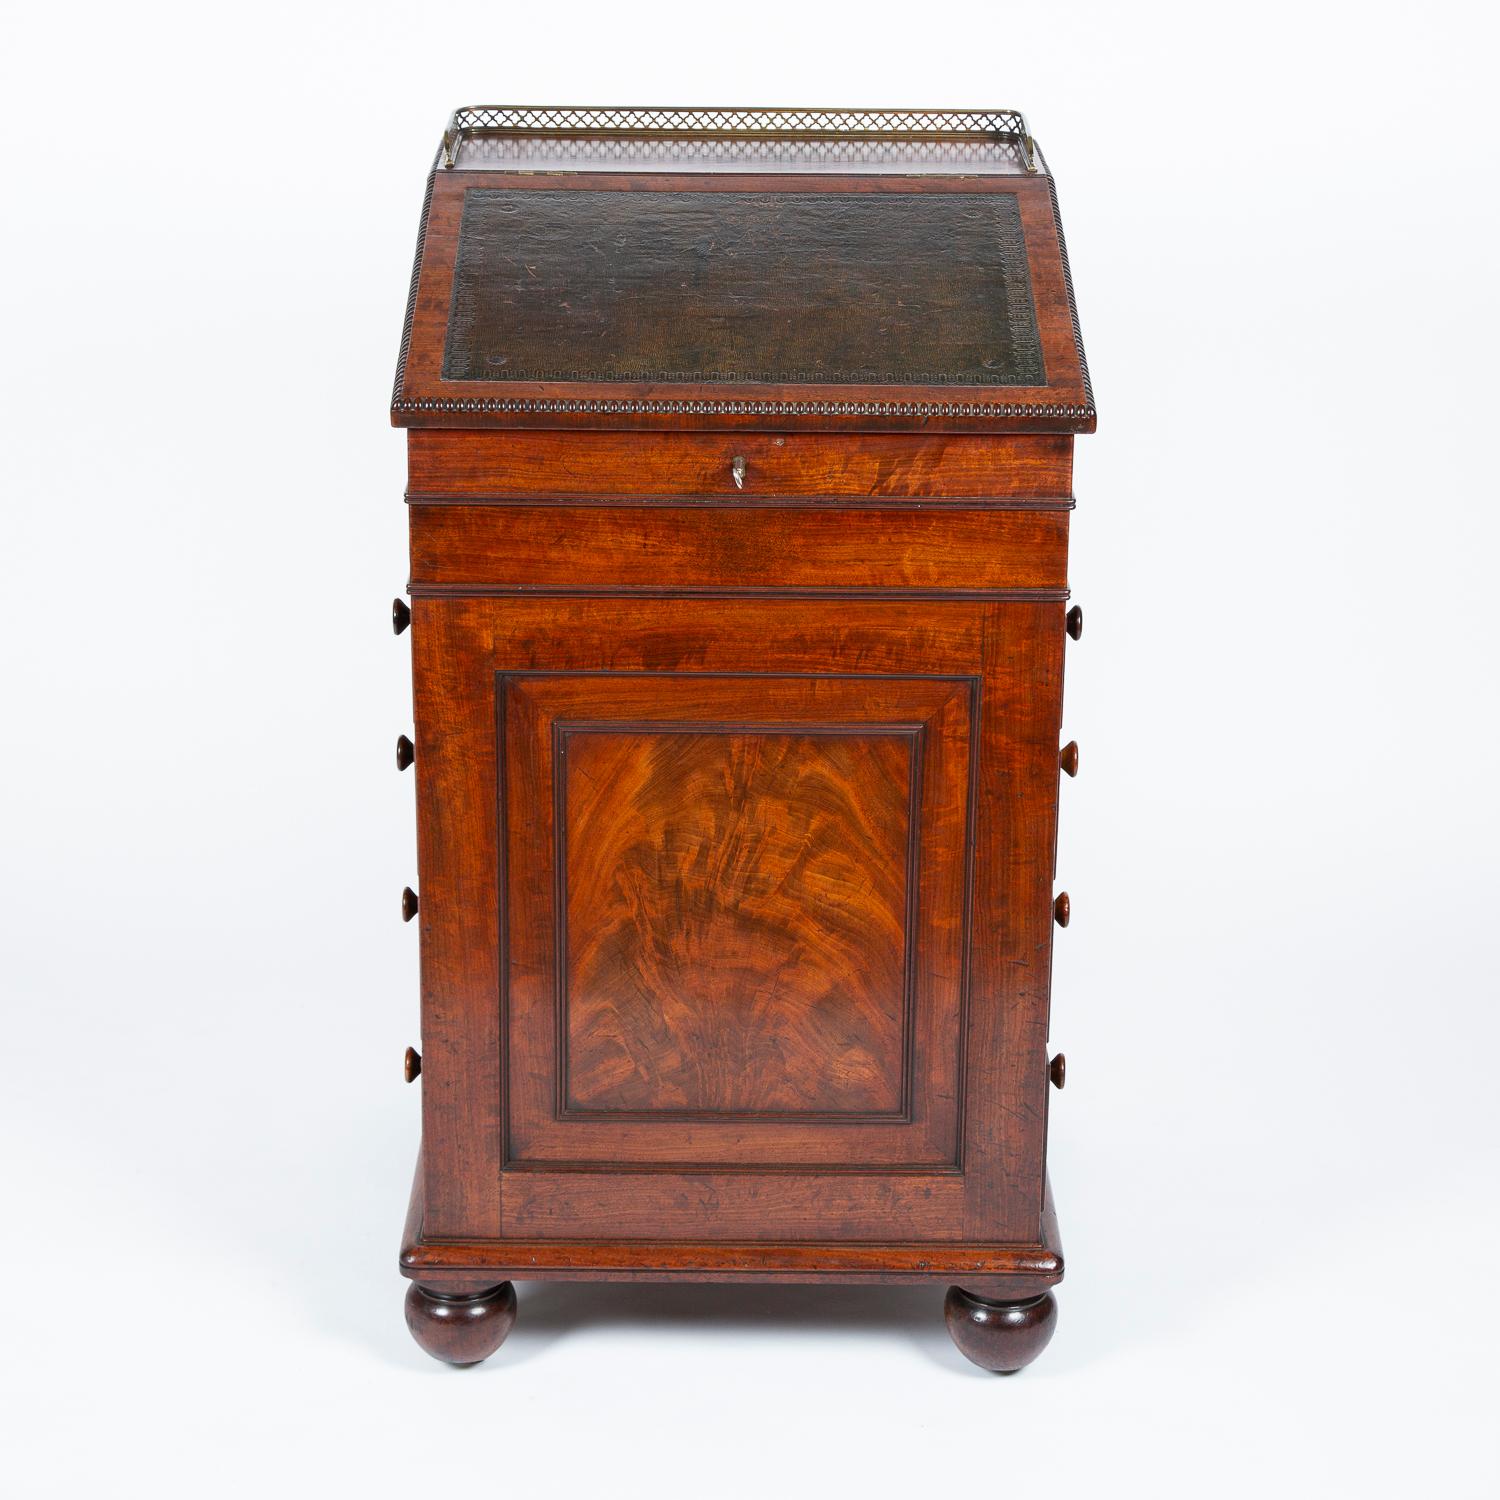 A Regency period mahogany Davenport firmly attributed to Gillows of Lancaster, with a forward sliding bureau section with tooled leather writing surface and a gilt brass pierced gallery, the interior of the bureau has two real and two dummy small